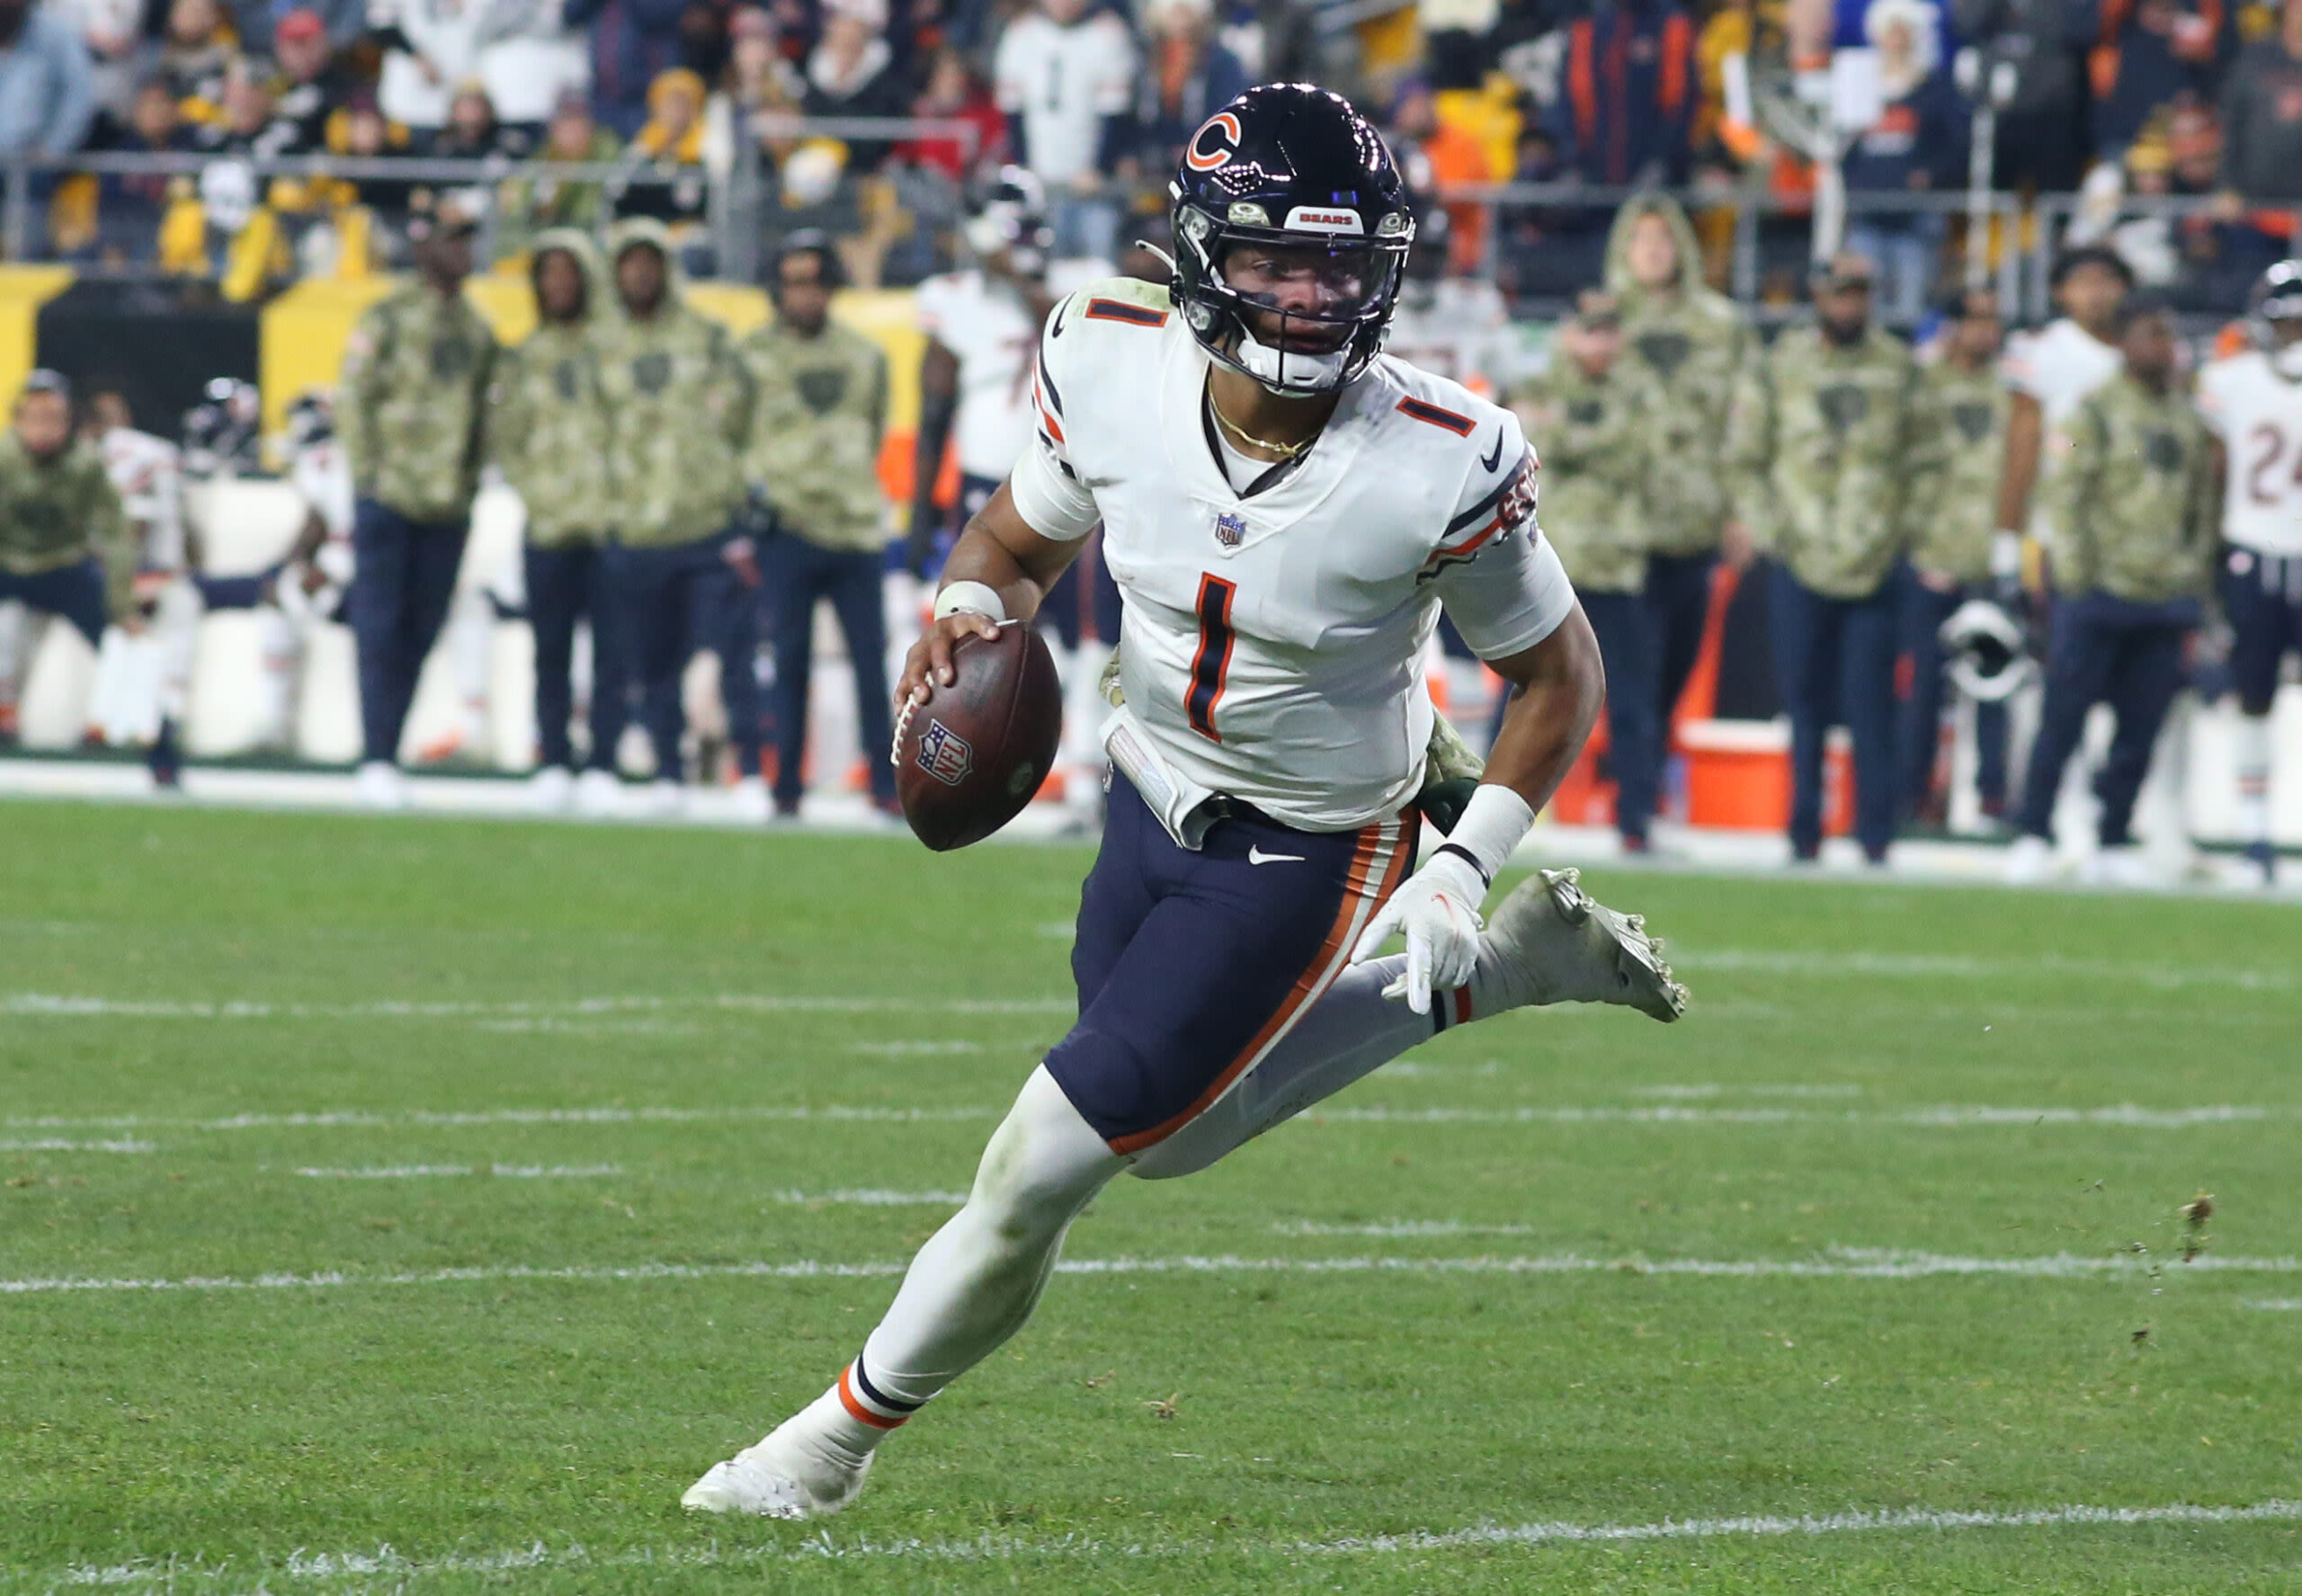 Former Bears coach says Steelers QB Justin Fields was ‘hard to watch’